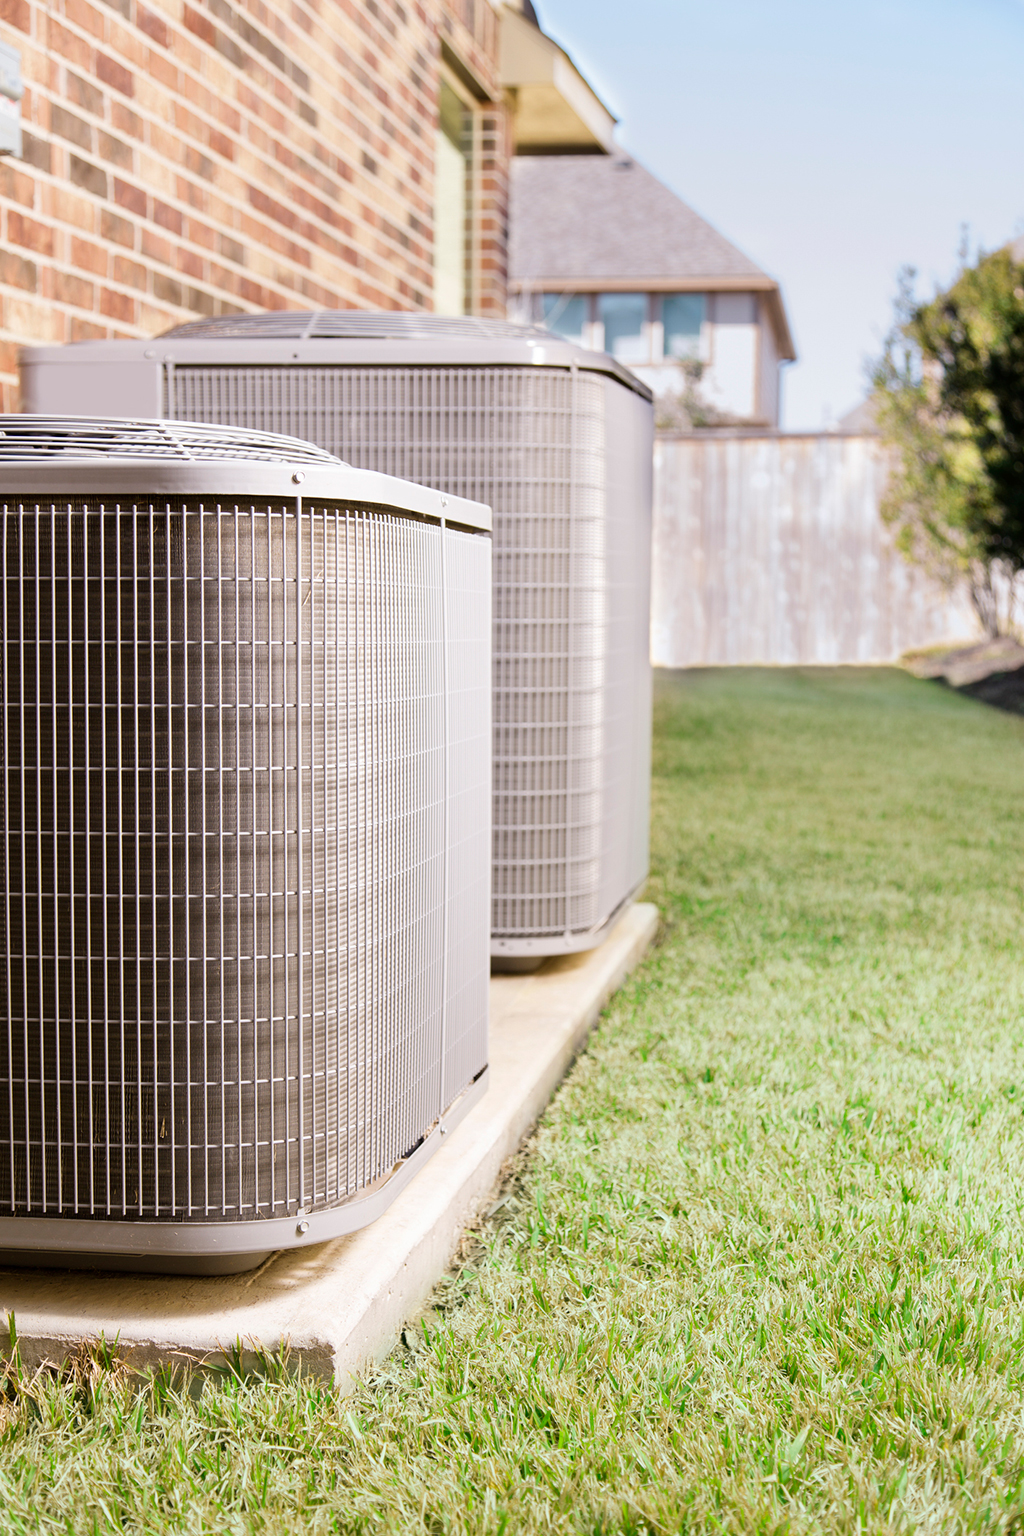 Air Conditioning Installation: Everything You Need To Know About HVAC Systems | Fort Worth, TX